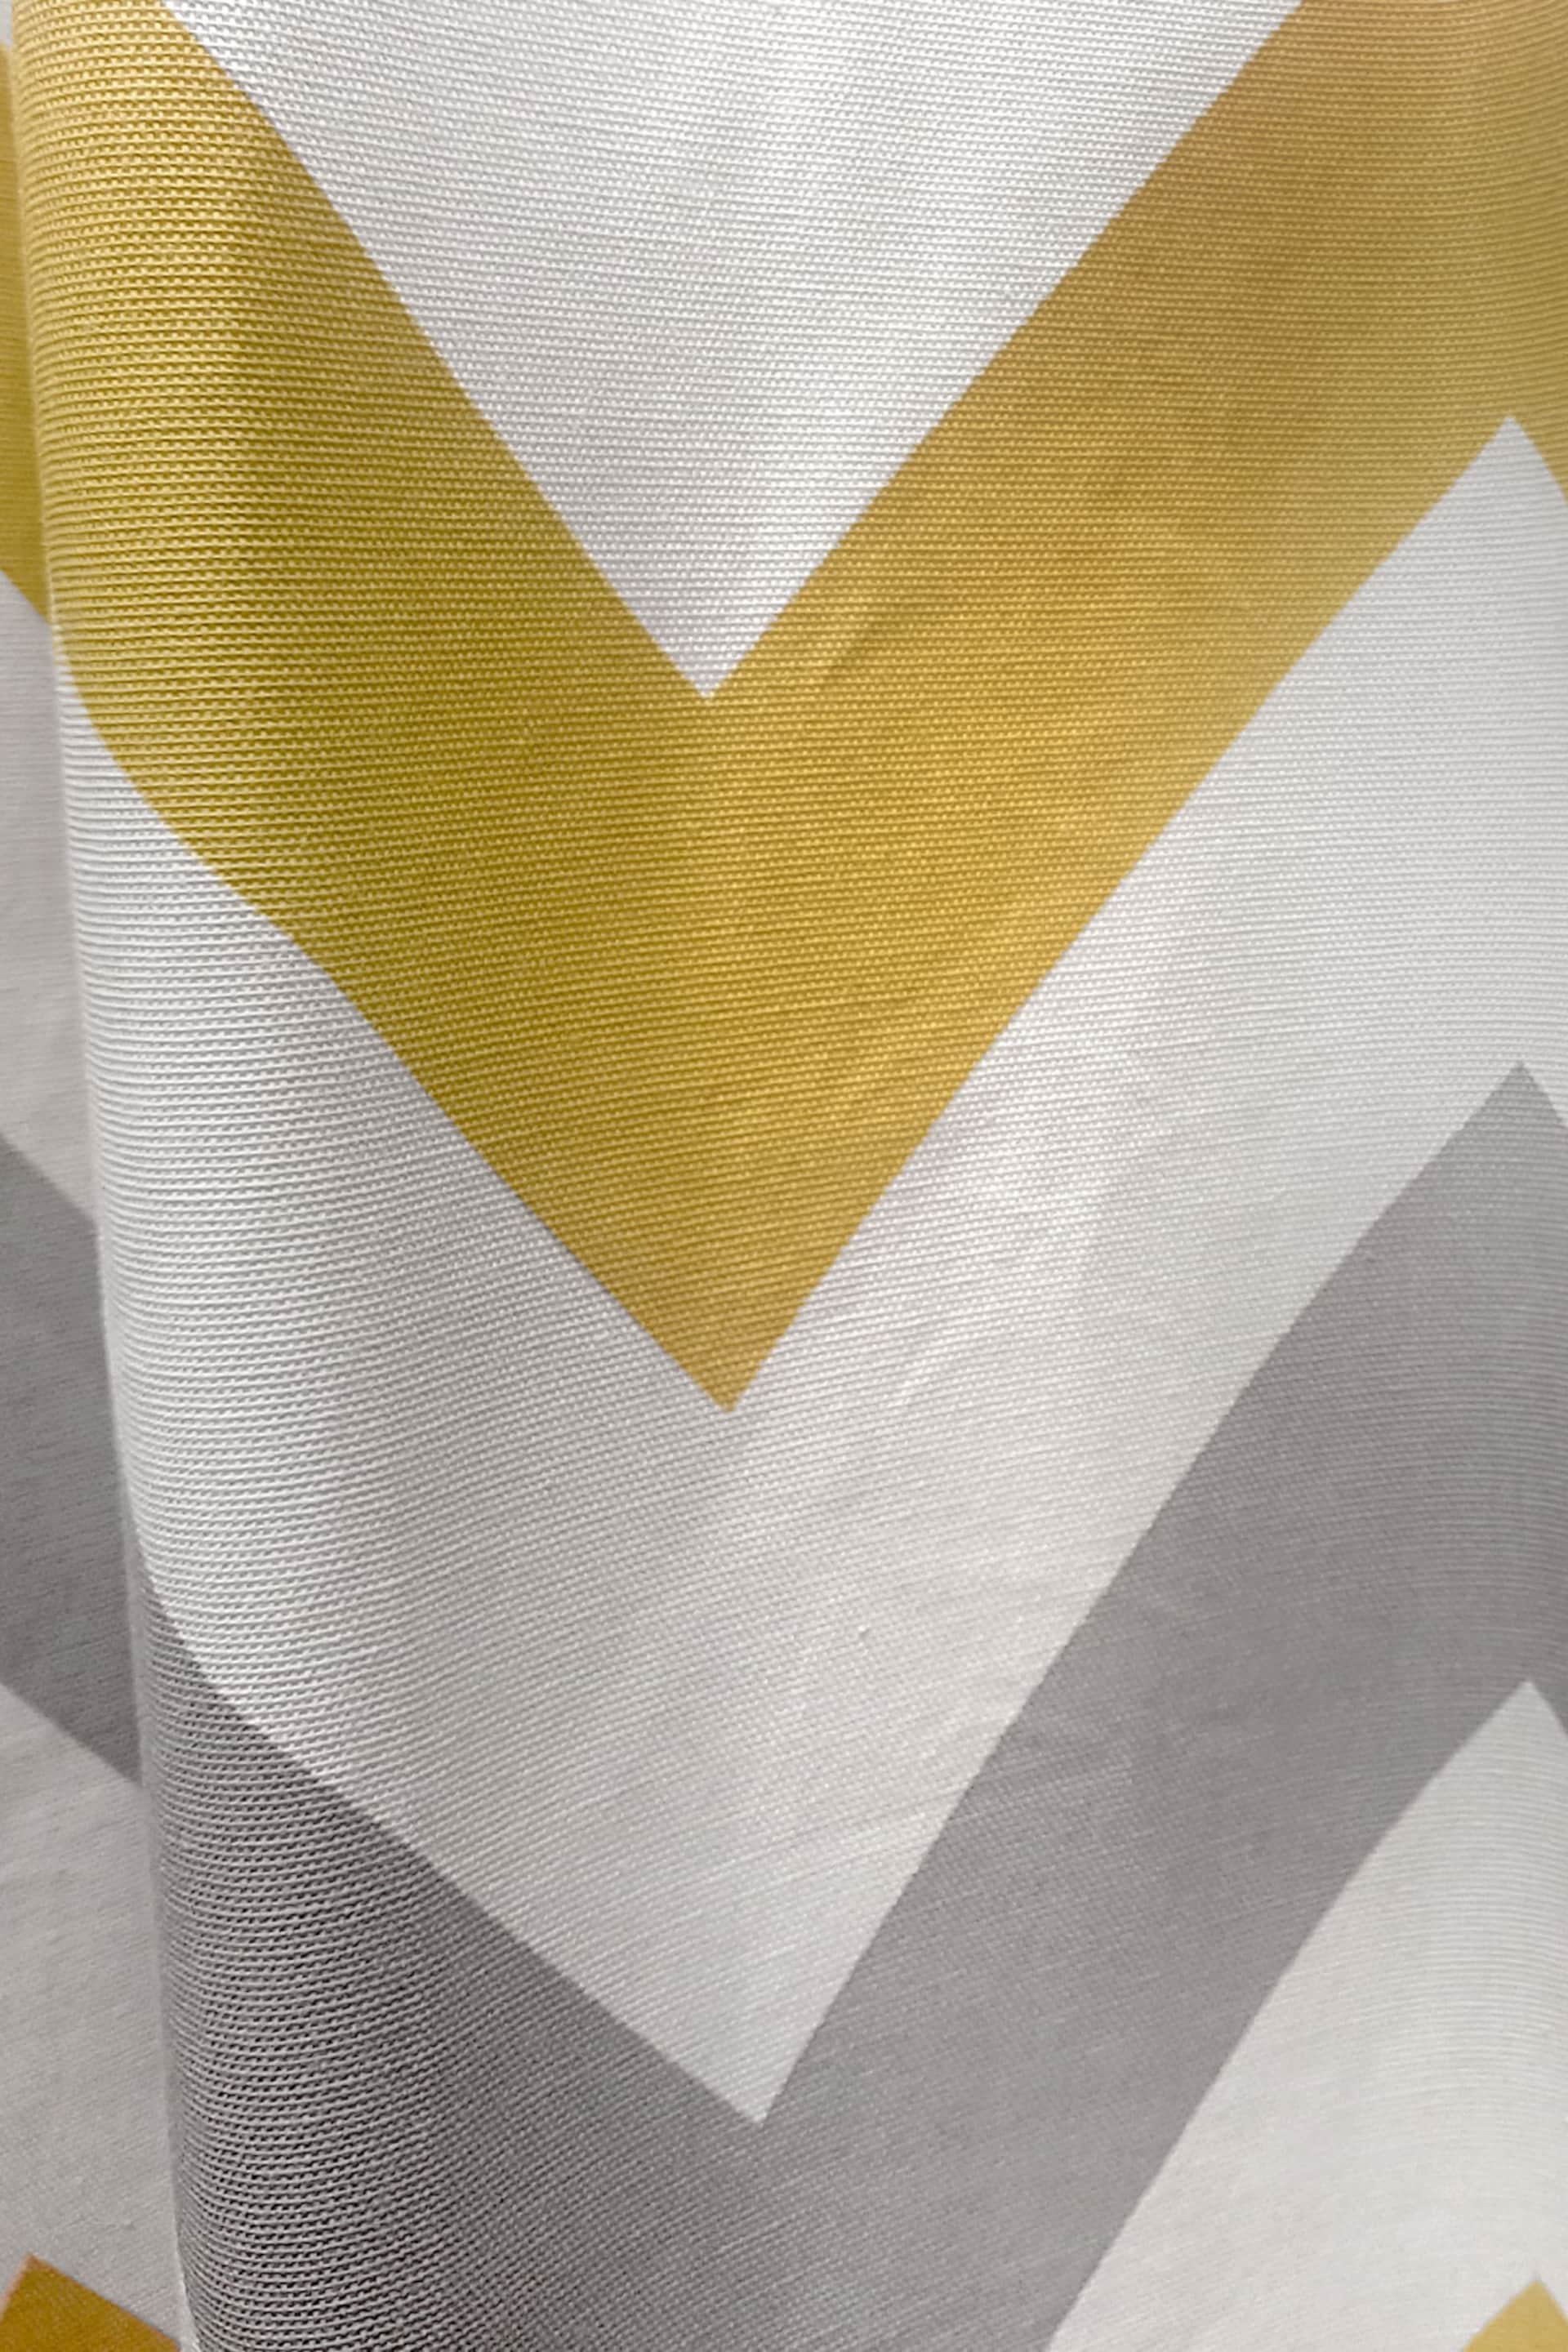 Fusion Ochre Yellow Chevron Geo Lined Eyelet Curtains - Image 2 of 3